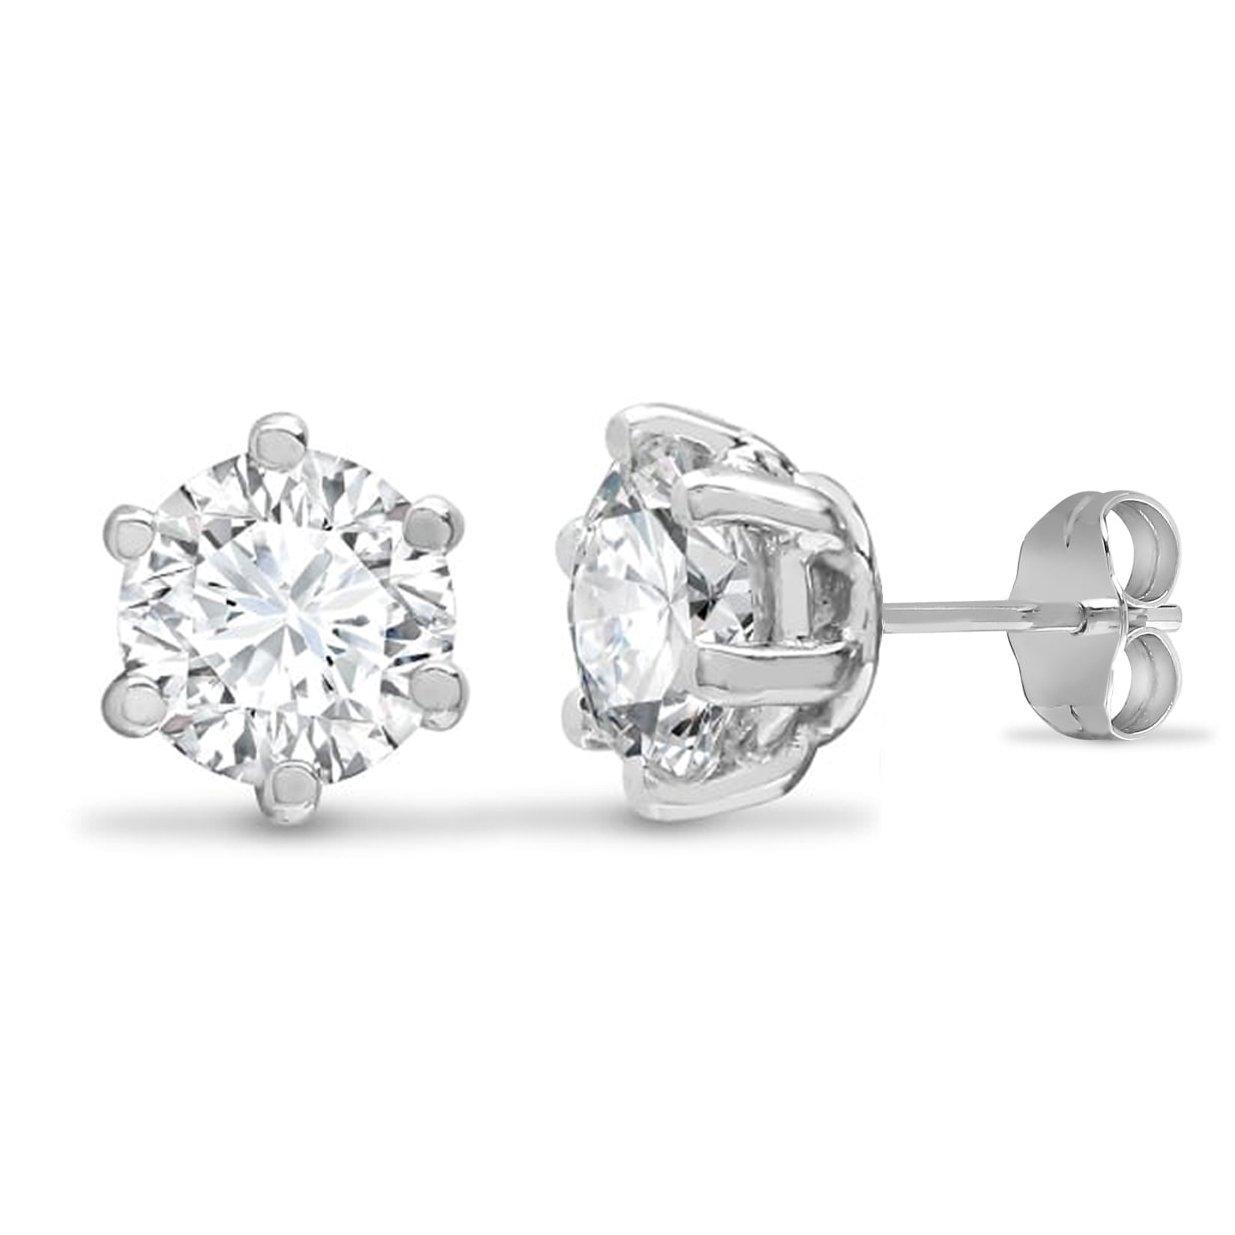 9ct White Gold  CZ 6 Claw Solitaire Stud Earrings, 6mm - JES178